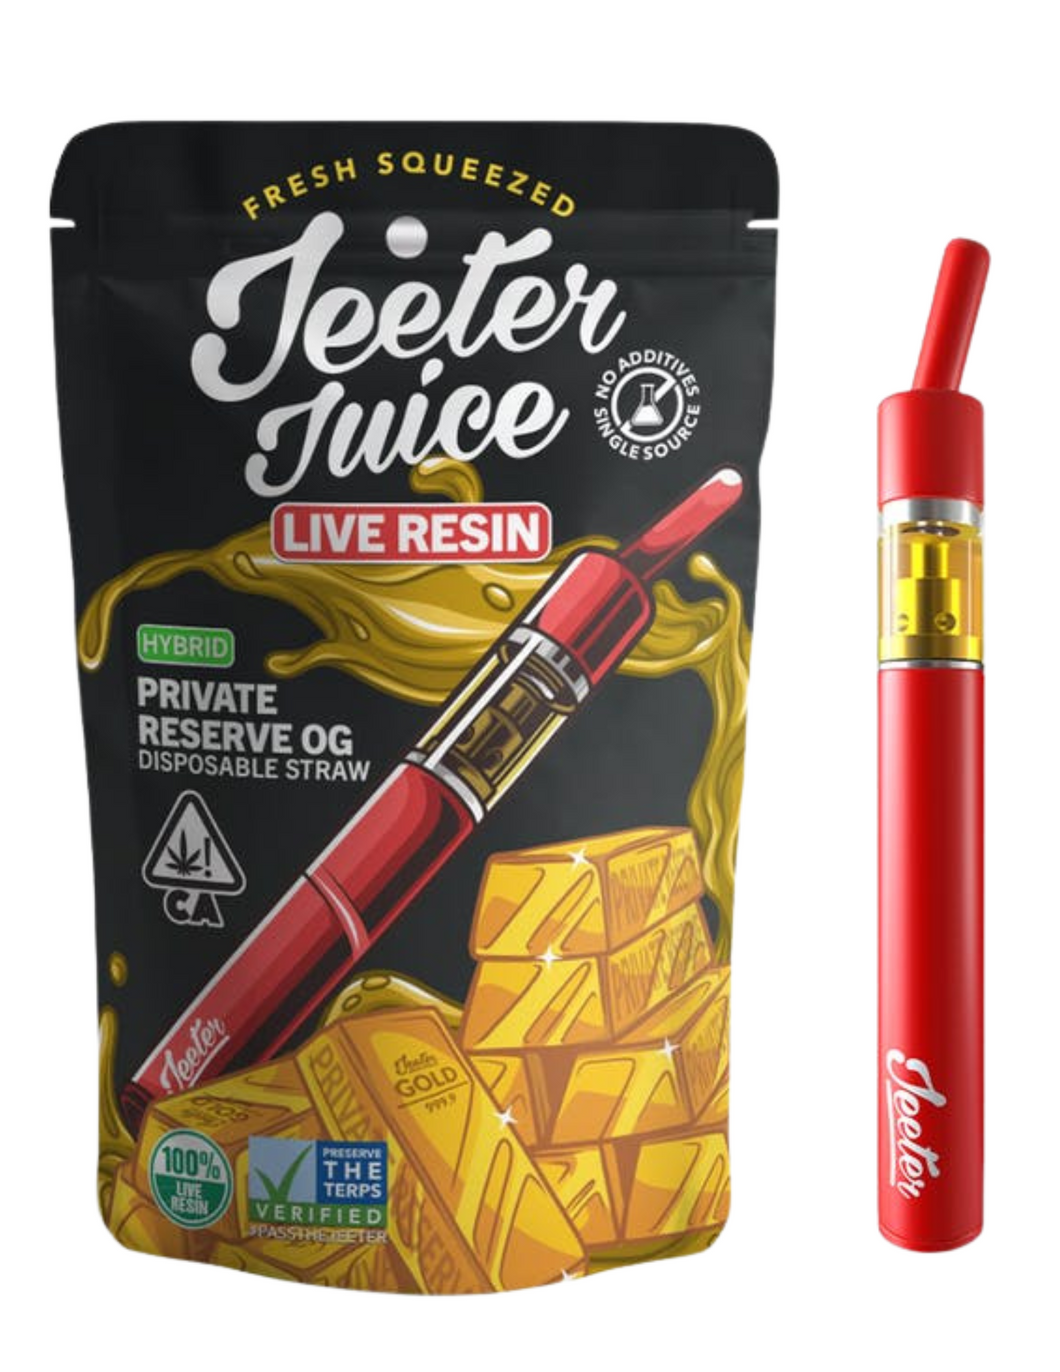 Jeeter Juice Live Resin Disposable Straw - Private Reserve OG (H)